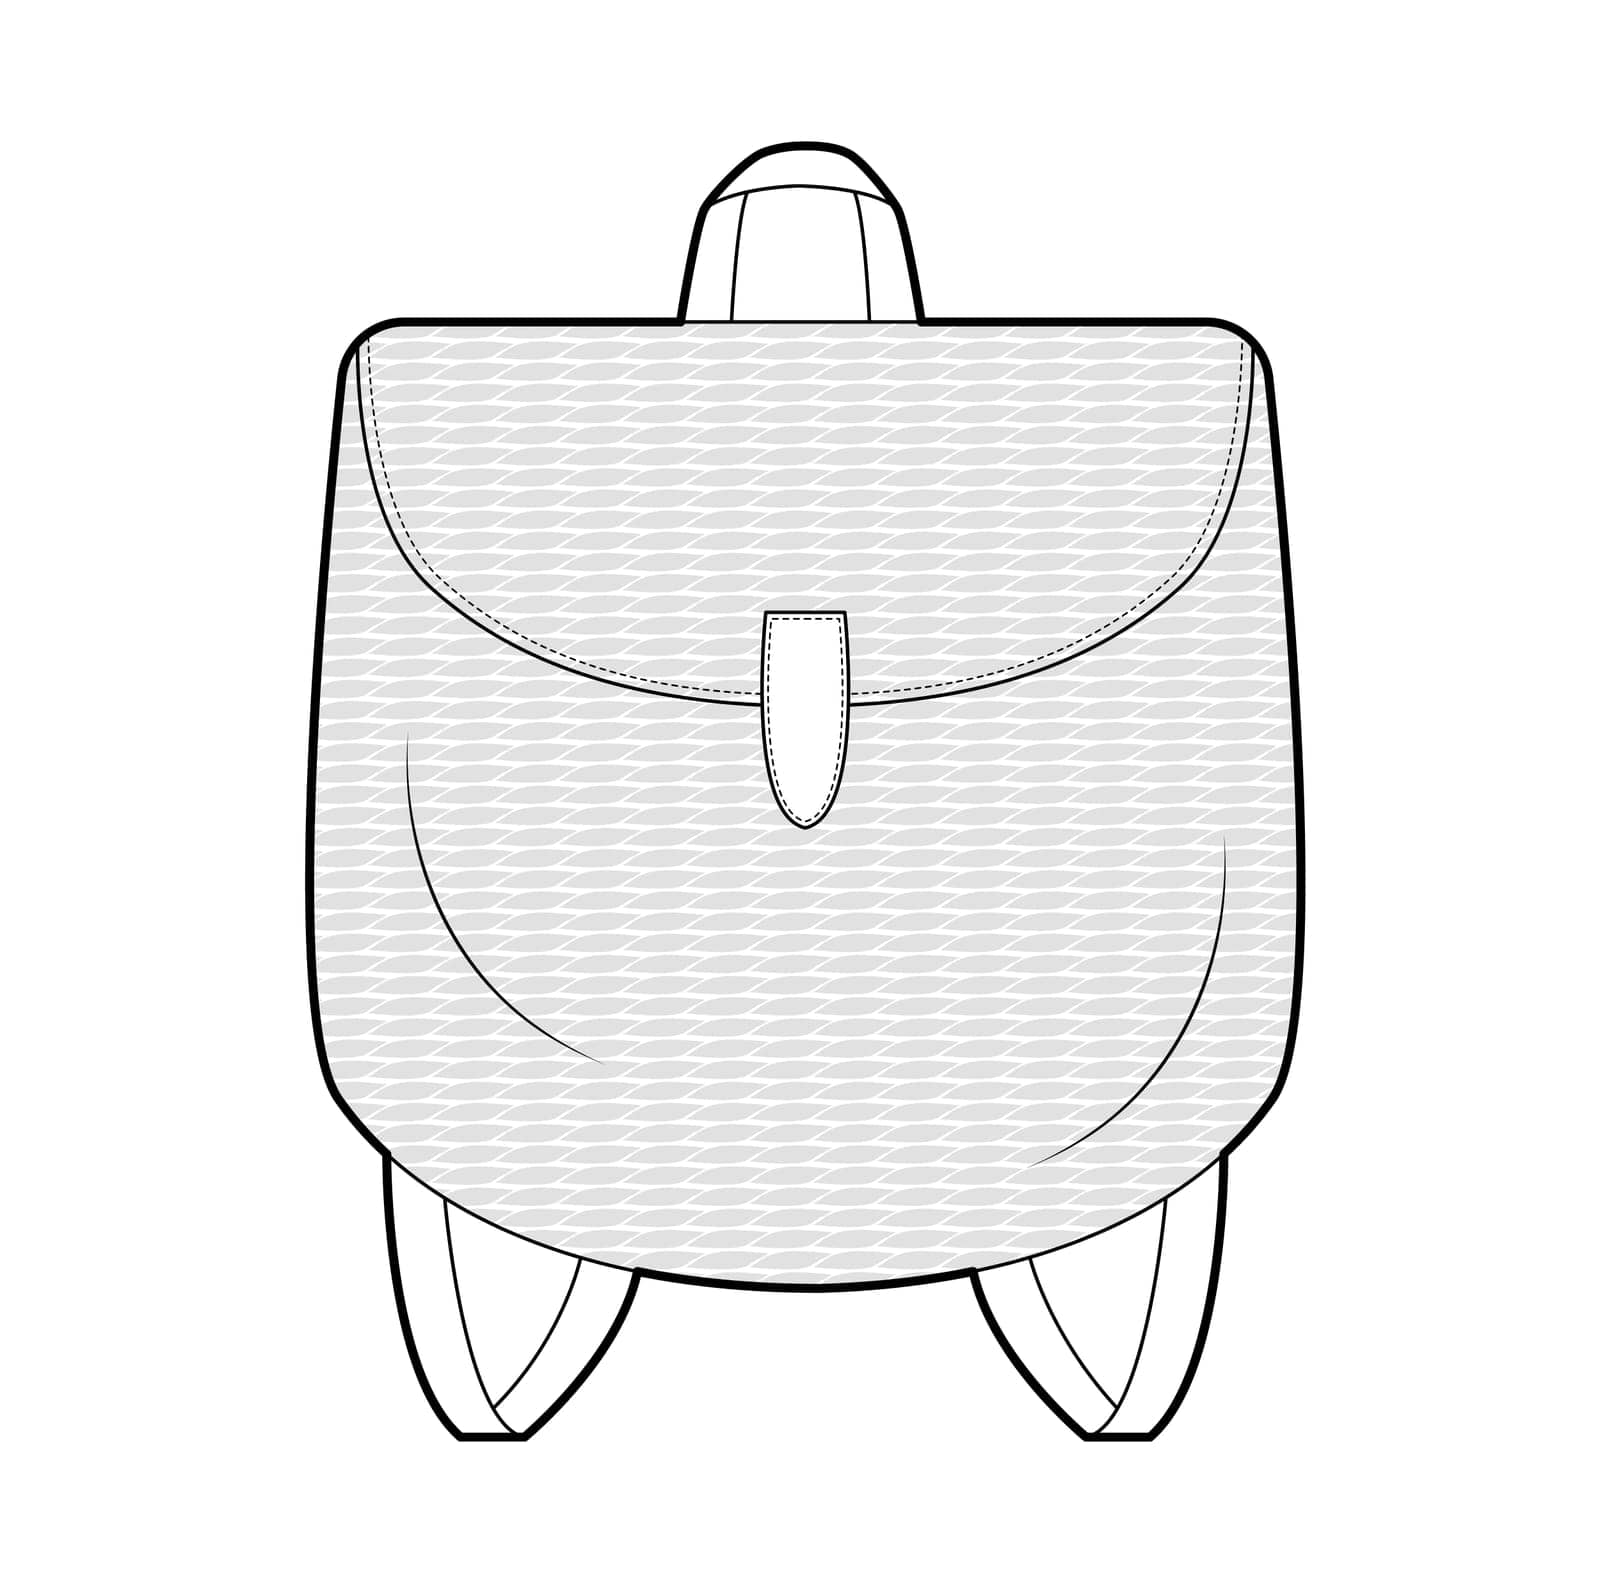 Straw backpack silhouette bag. Fashion accessory technical illustration. Vector schoolbag front view for Men, women, unisex style, flat handbag CAD mockup sketch outline isolated